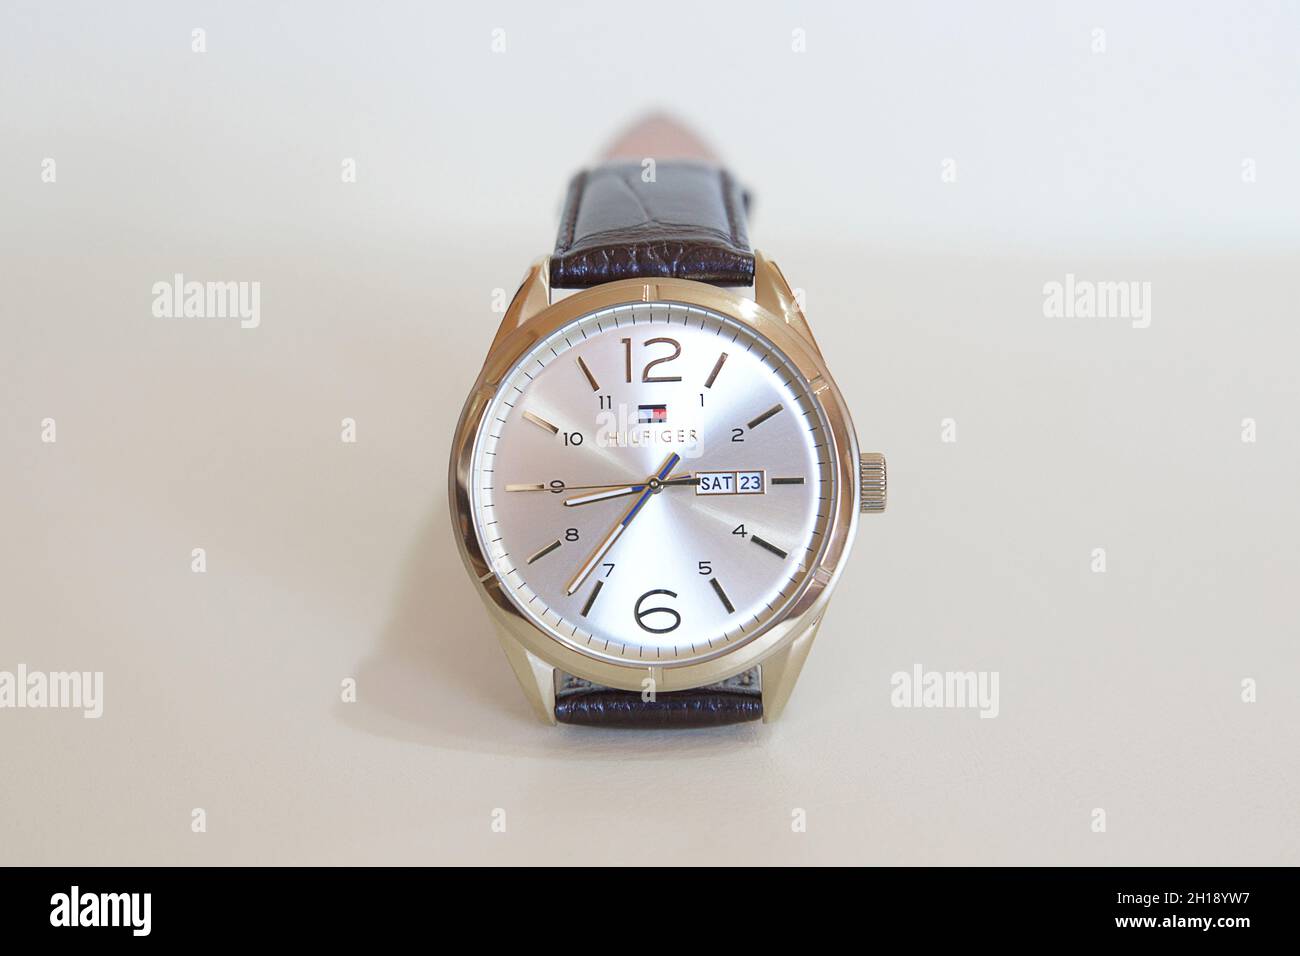 Modern fashionable Tommy Hilfiger male watch with golden details and leather strap displayed against a white background, elegant accessory for men Stock Photo